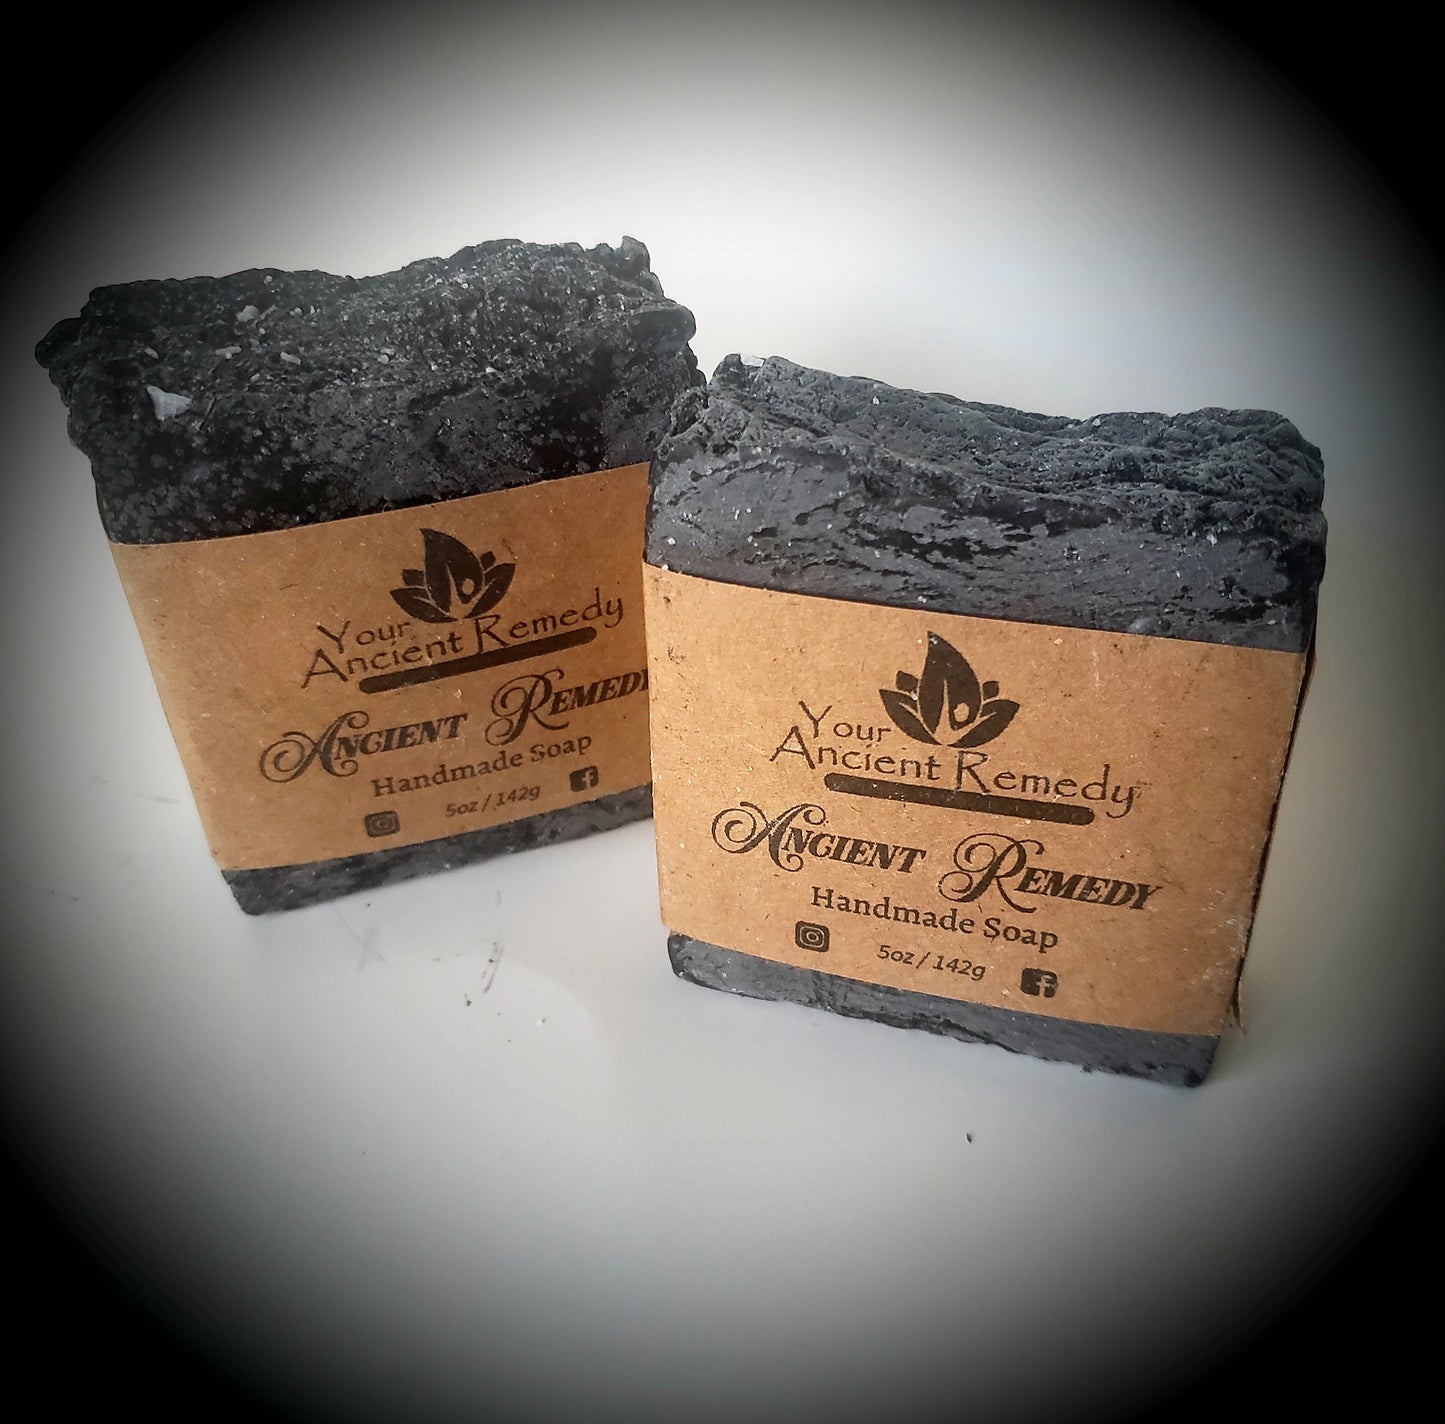 Ancient Remedy Handmade Soap (Thieves/Tiger Balm Type)